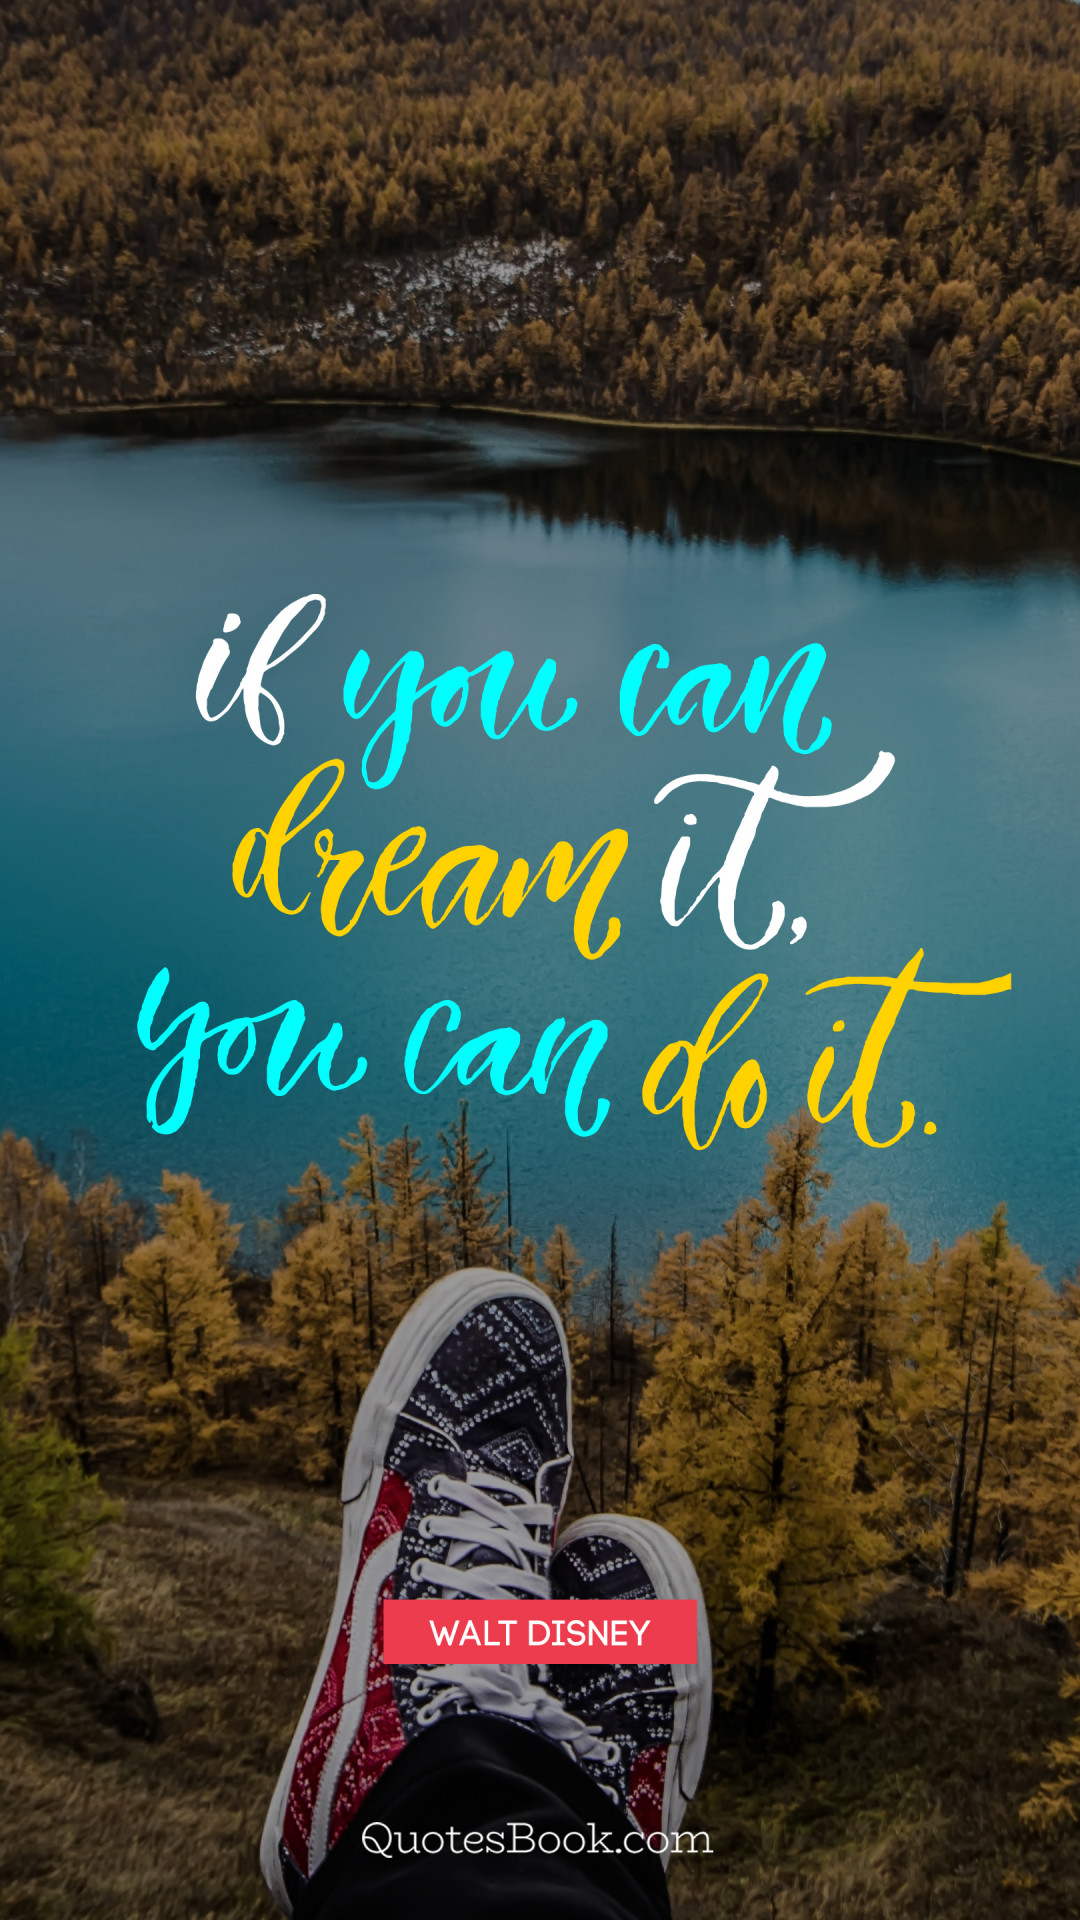 If you can dream it, you can do it. - Quote by Walt Disney - QuotesBook